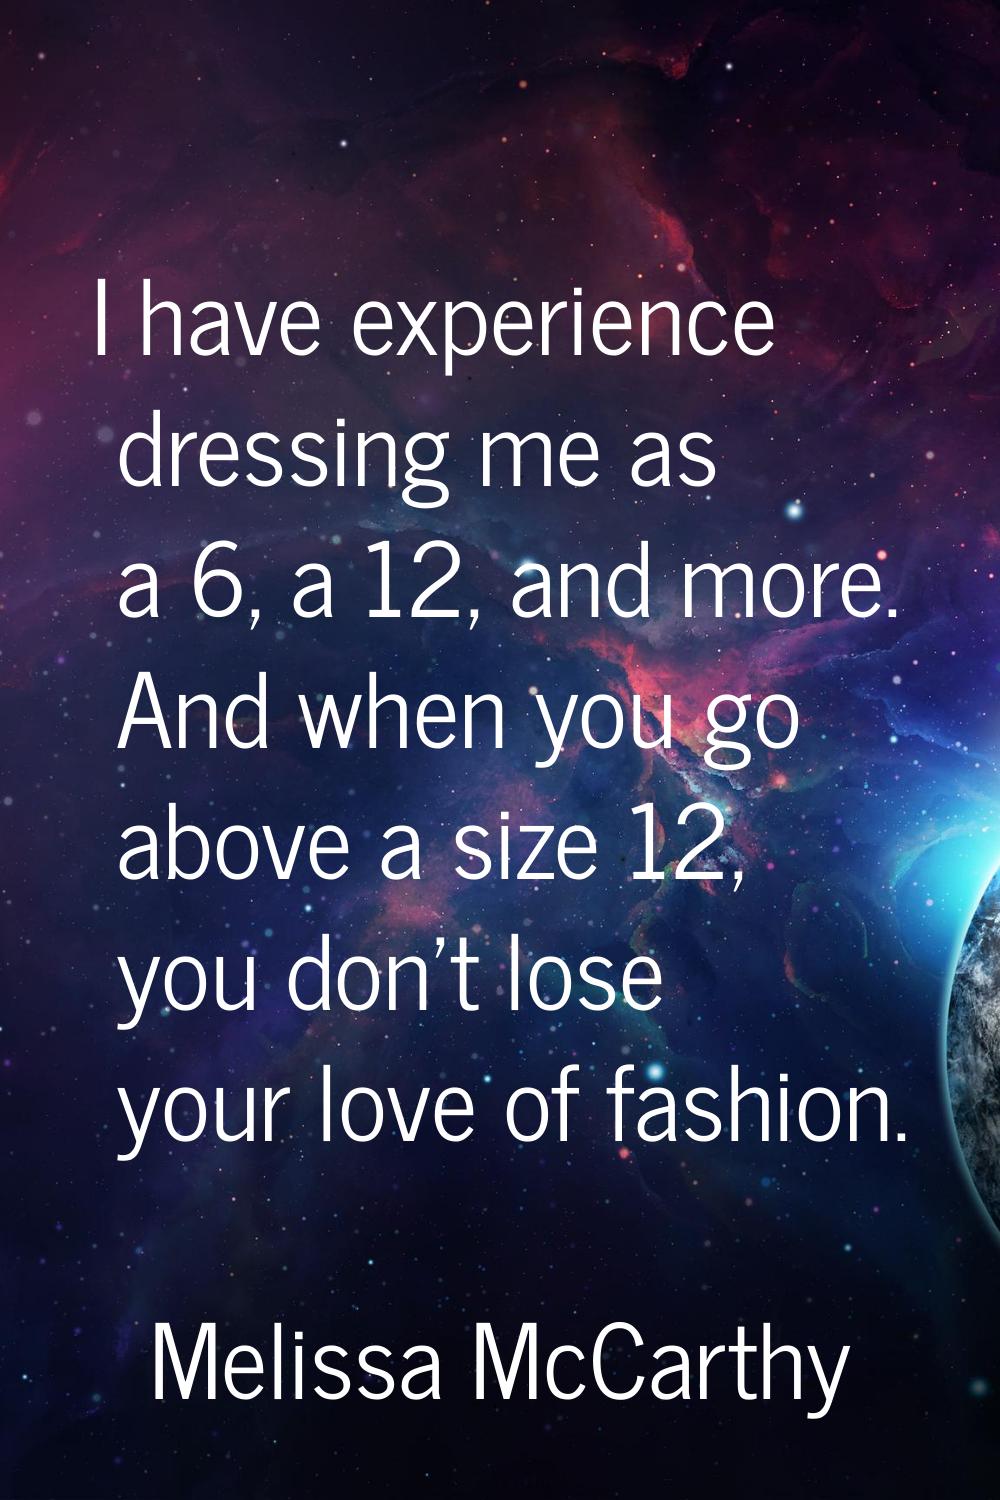 I have experience dressing me as a 6, a 12, and more. And when you go above a size 12, you don't lo